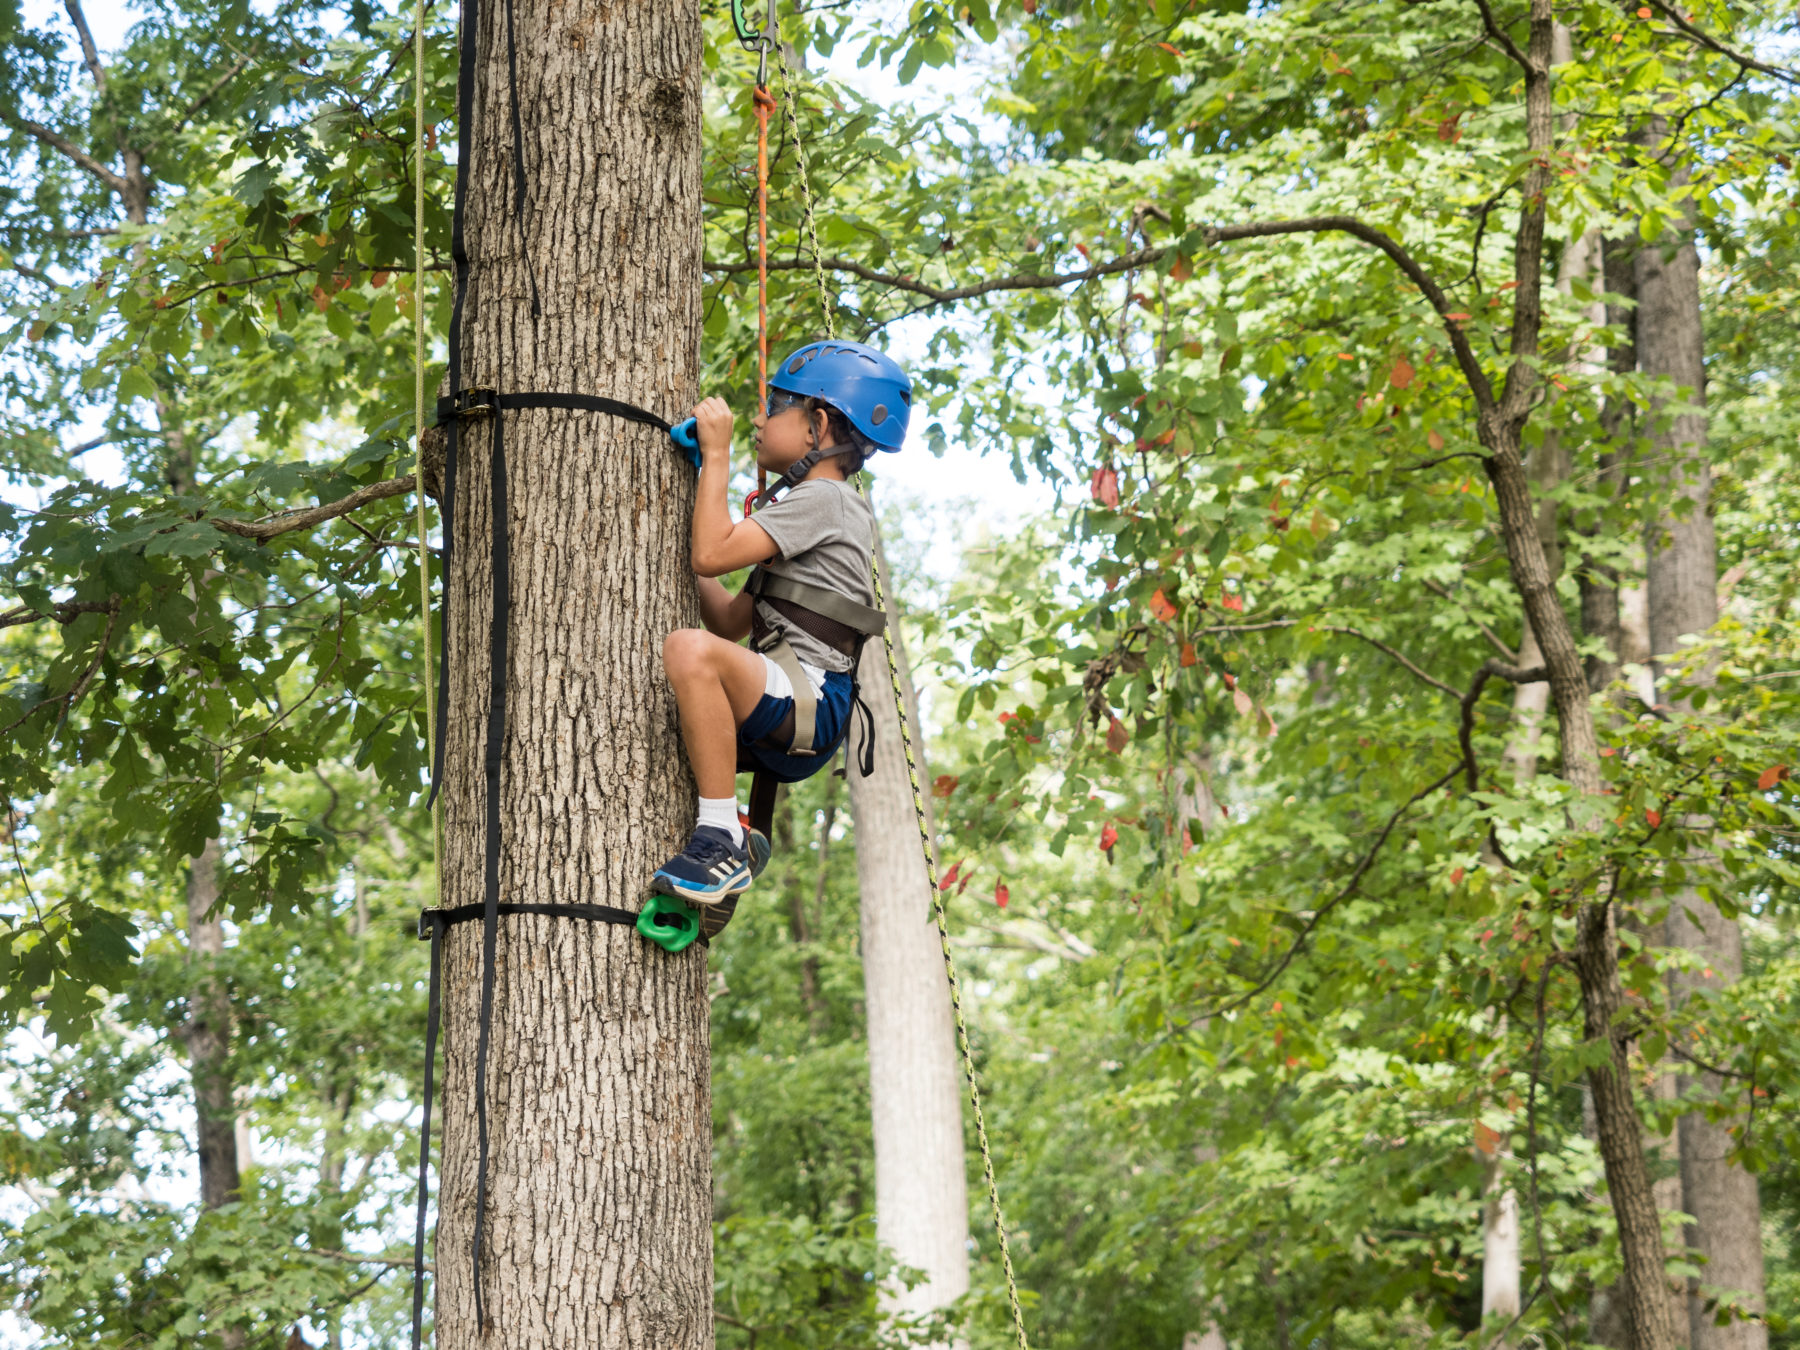 Child in harness climbing a tree.
